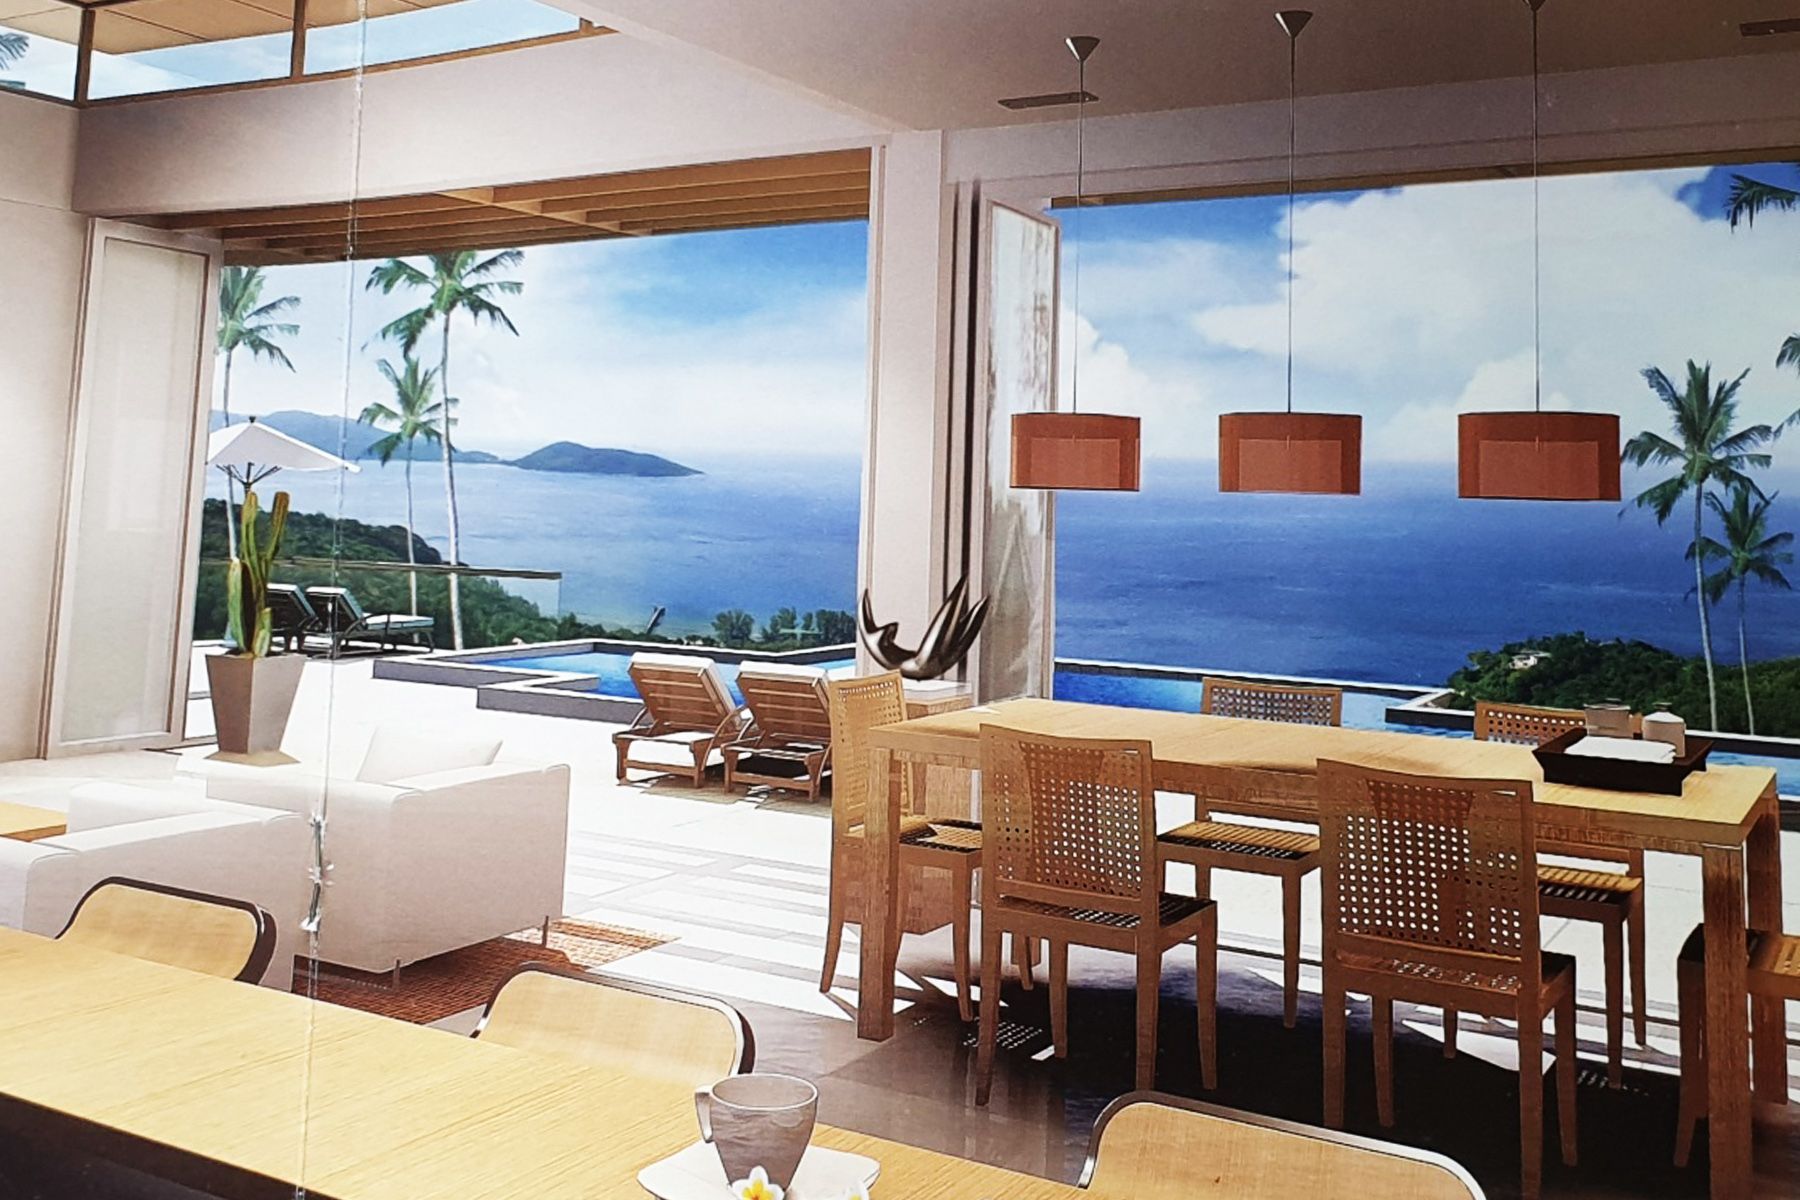 Projects of Phuket Realty